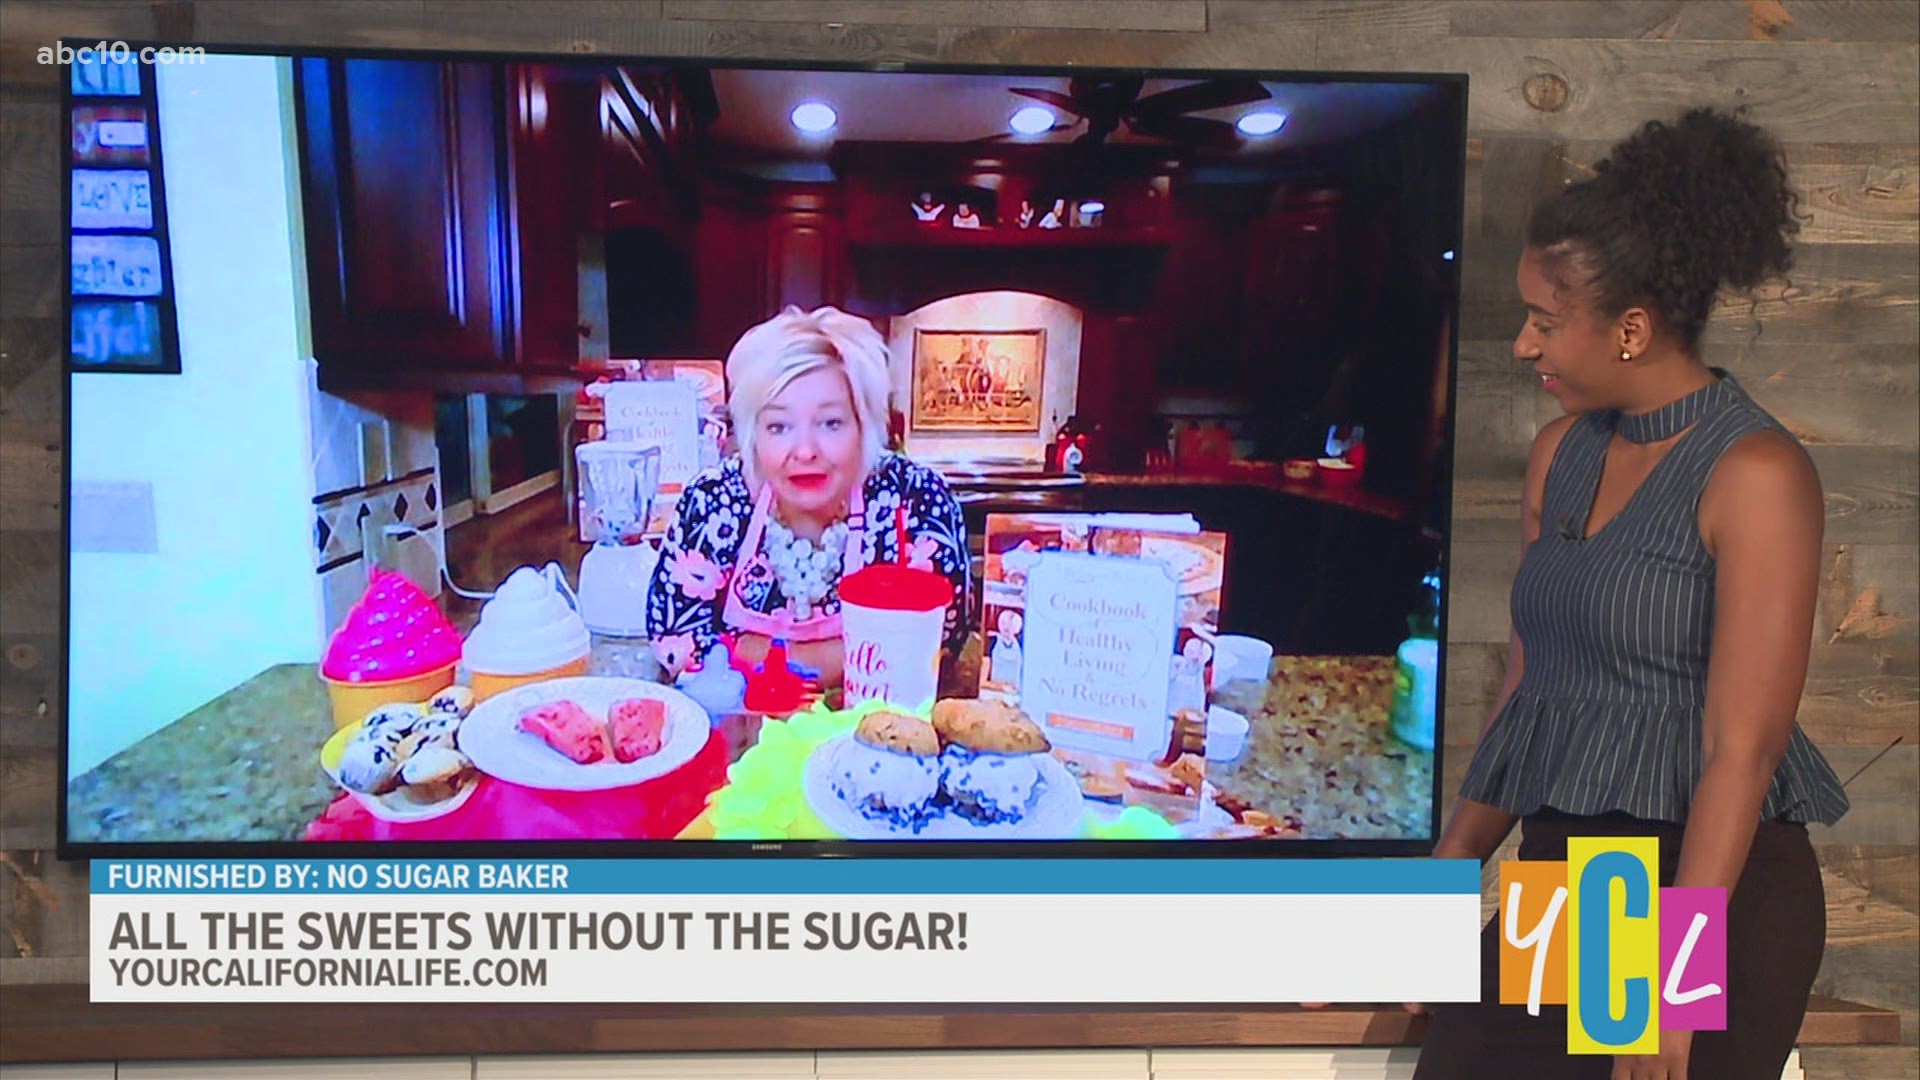 The No Sugar Baker whips up a few tasty treats that are sugar free.